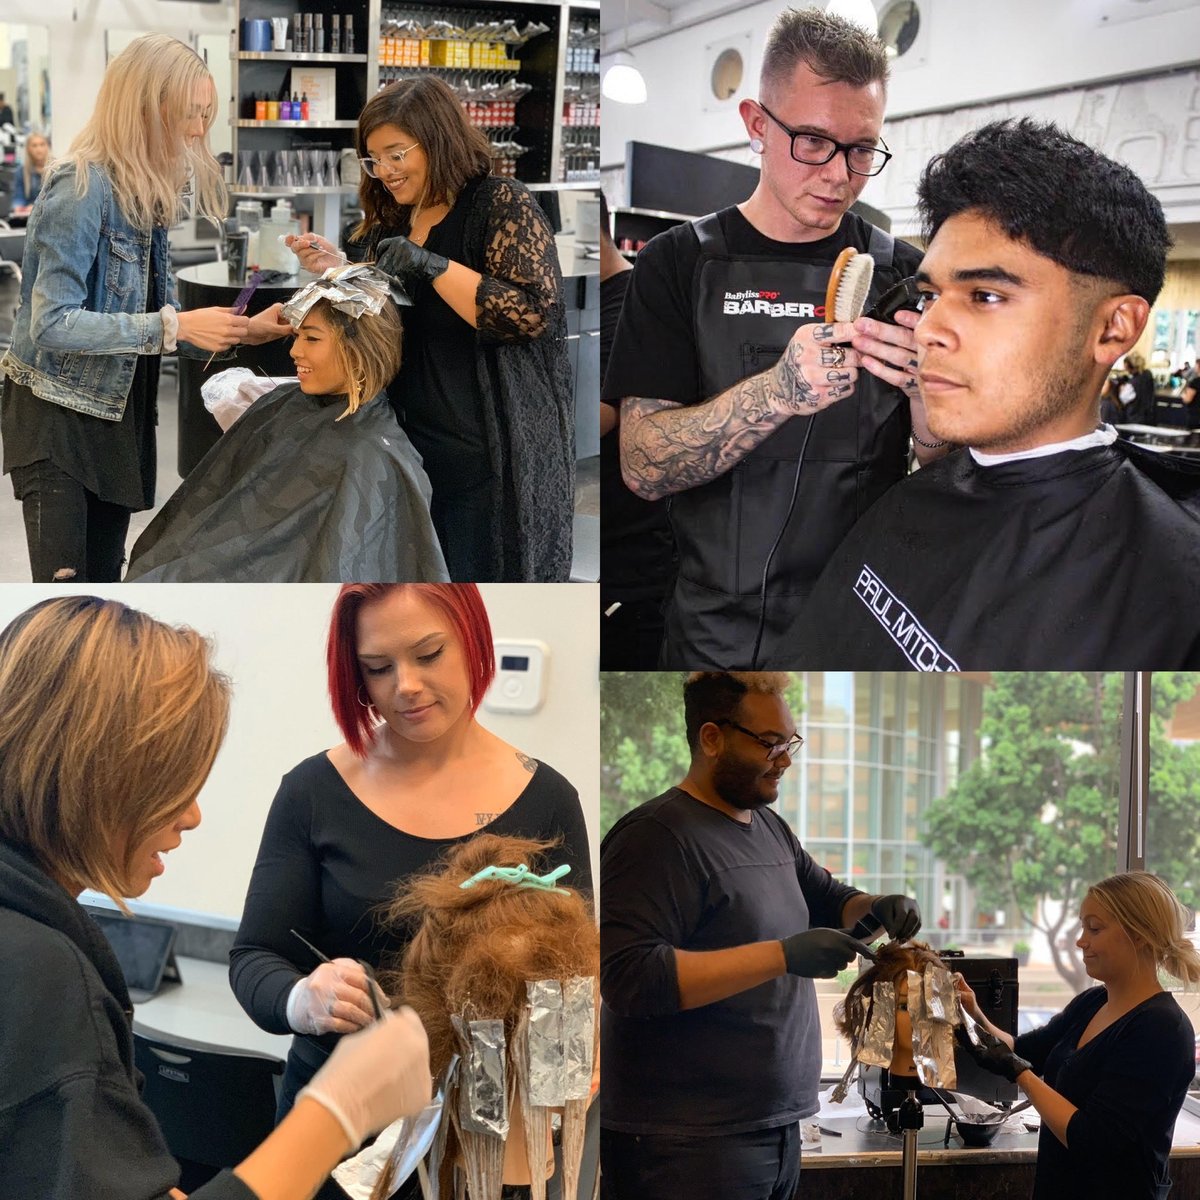 Eeny, meeny, miny, moe. Makeup, Barbering, or Cosmo? Choose your path and make your dreams come true. Join us October 29th from 6-8PM for our National Open House Night.
#beautycareer#barberschool#beautyschool  #sdbeauty#sdbarbers#sdmakeup#sdhairstylist#sdmua